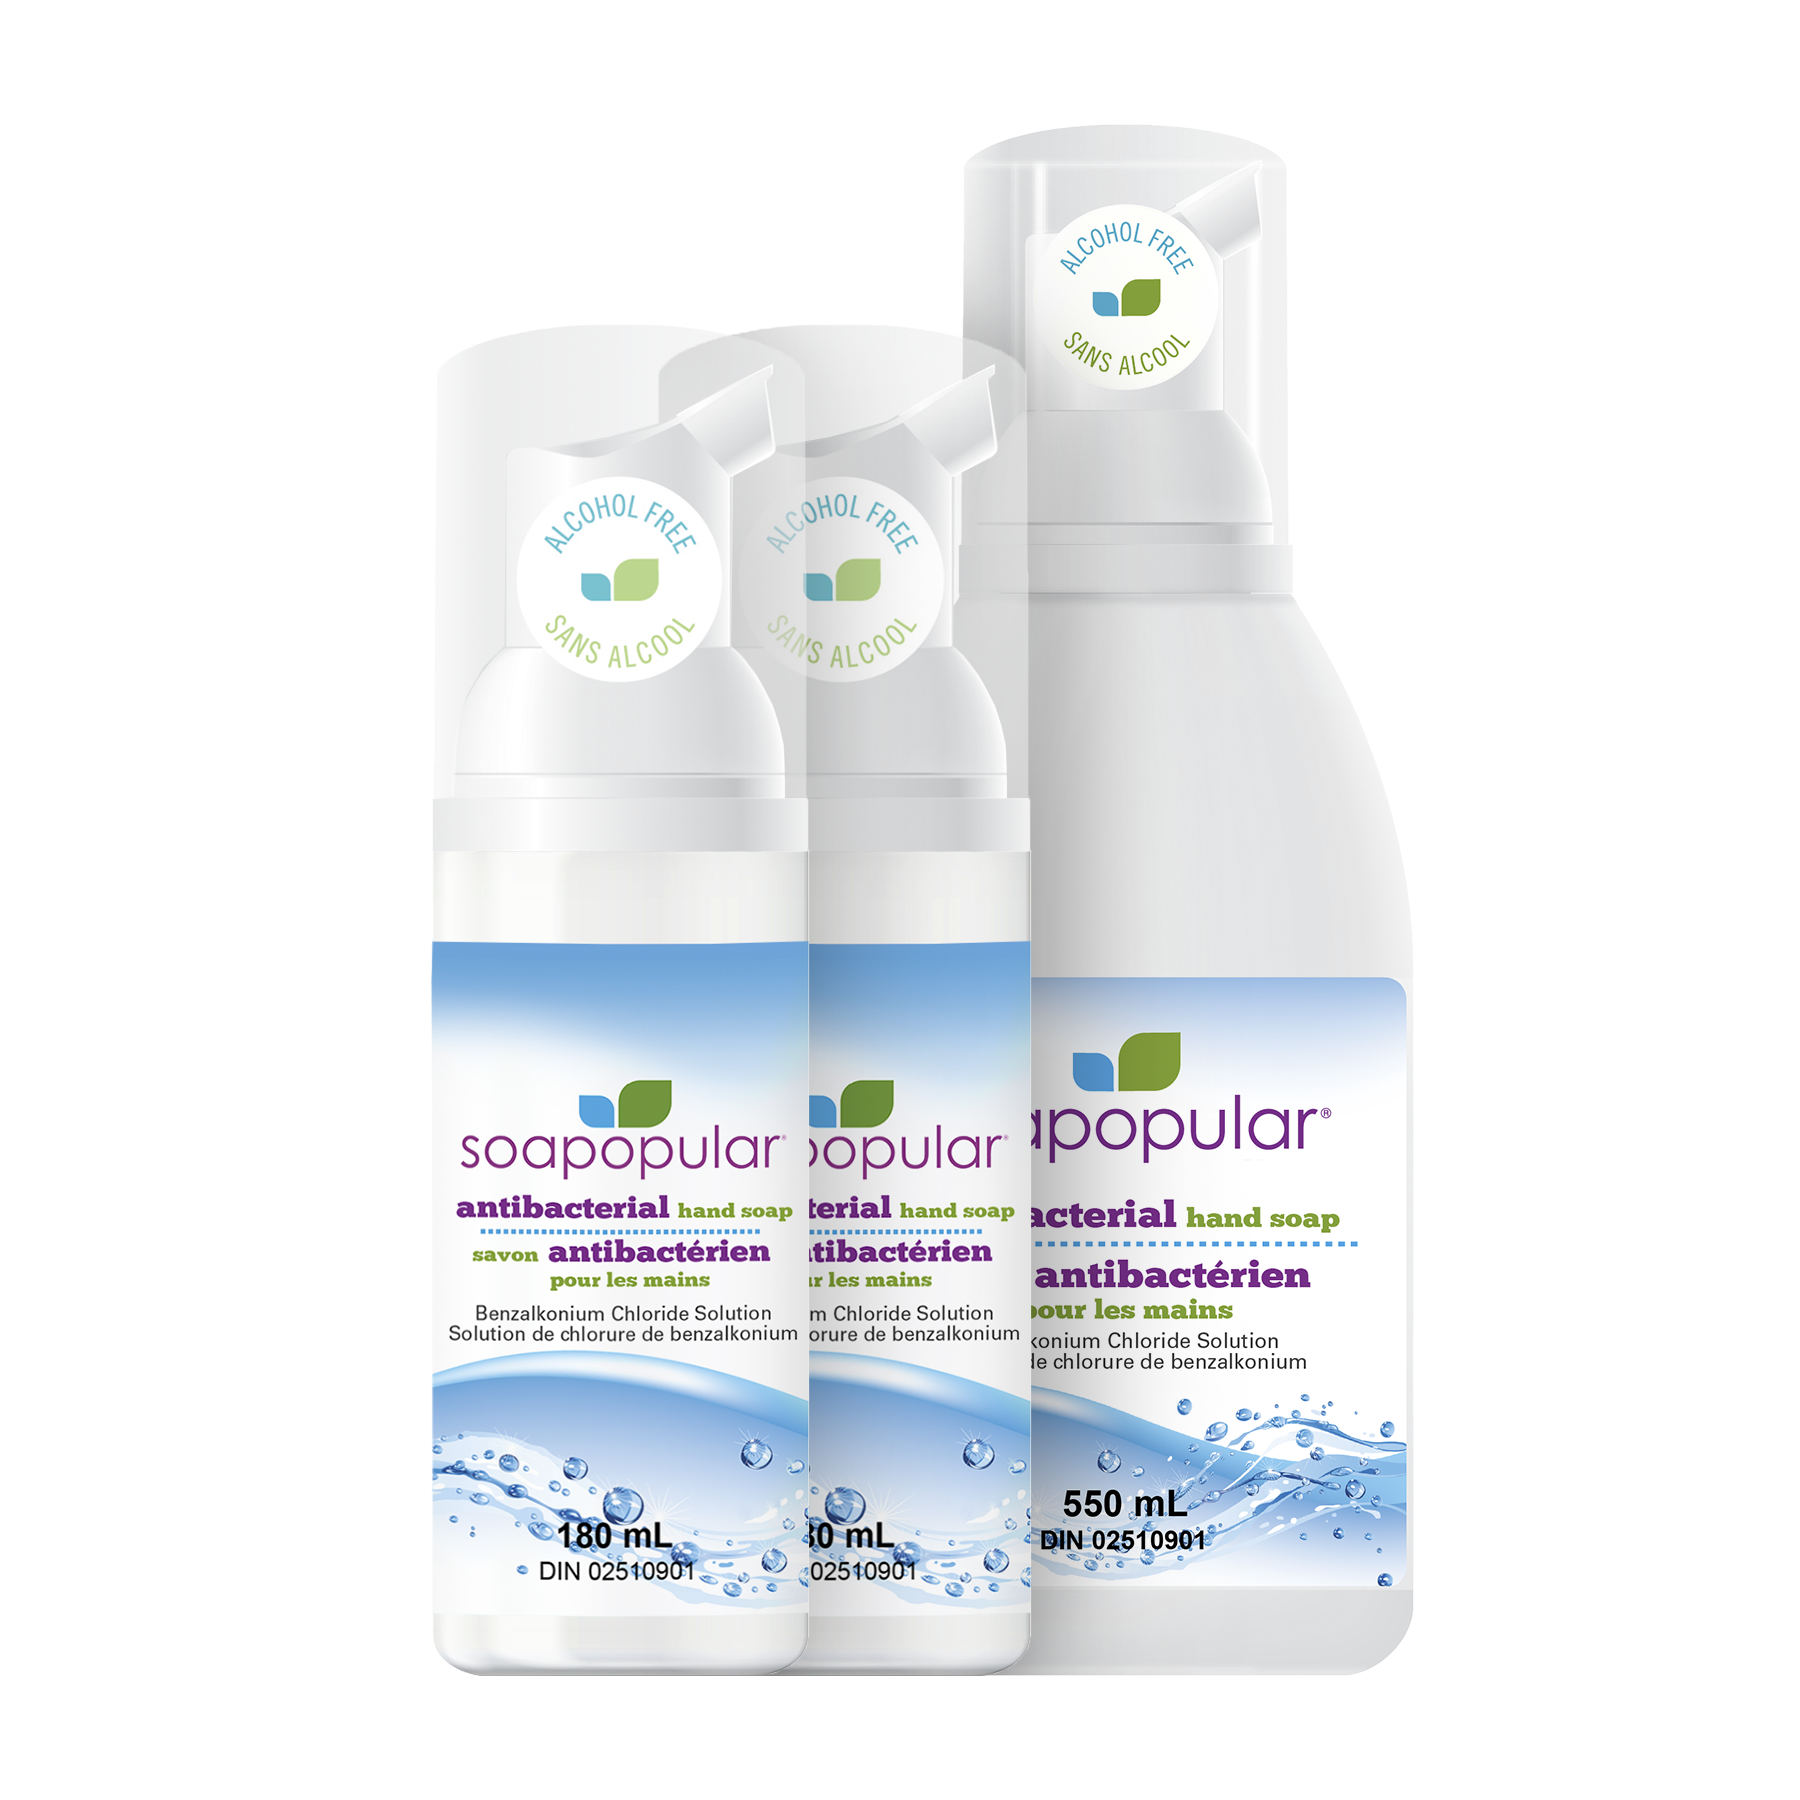 Soapopular triclosan free hand soap package comes with two different sizes that have a foaming formula.